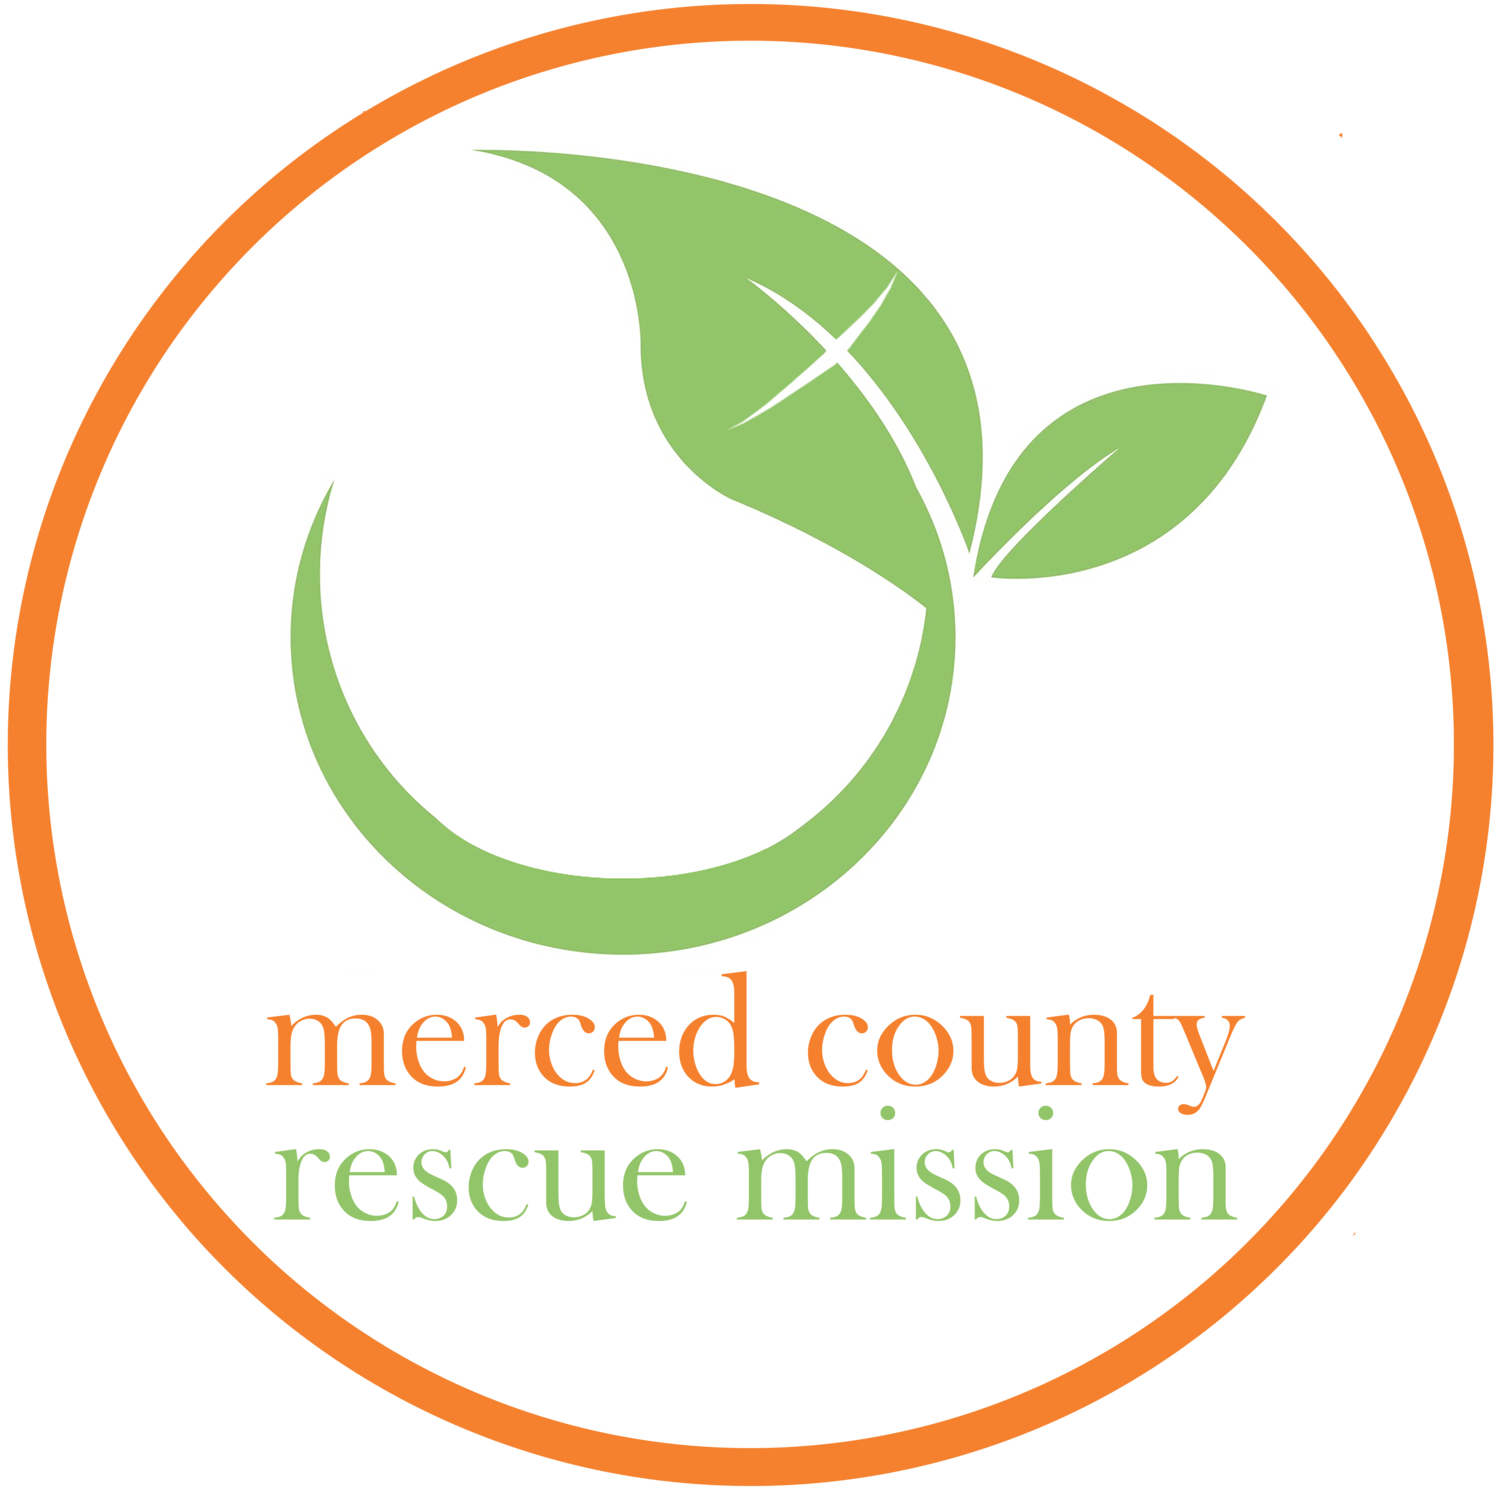 Merced County Rescue Mission